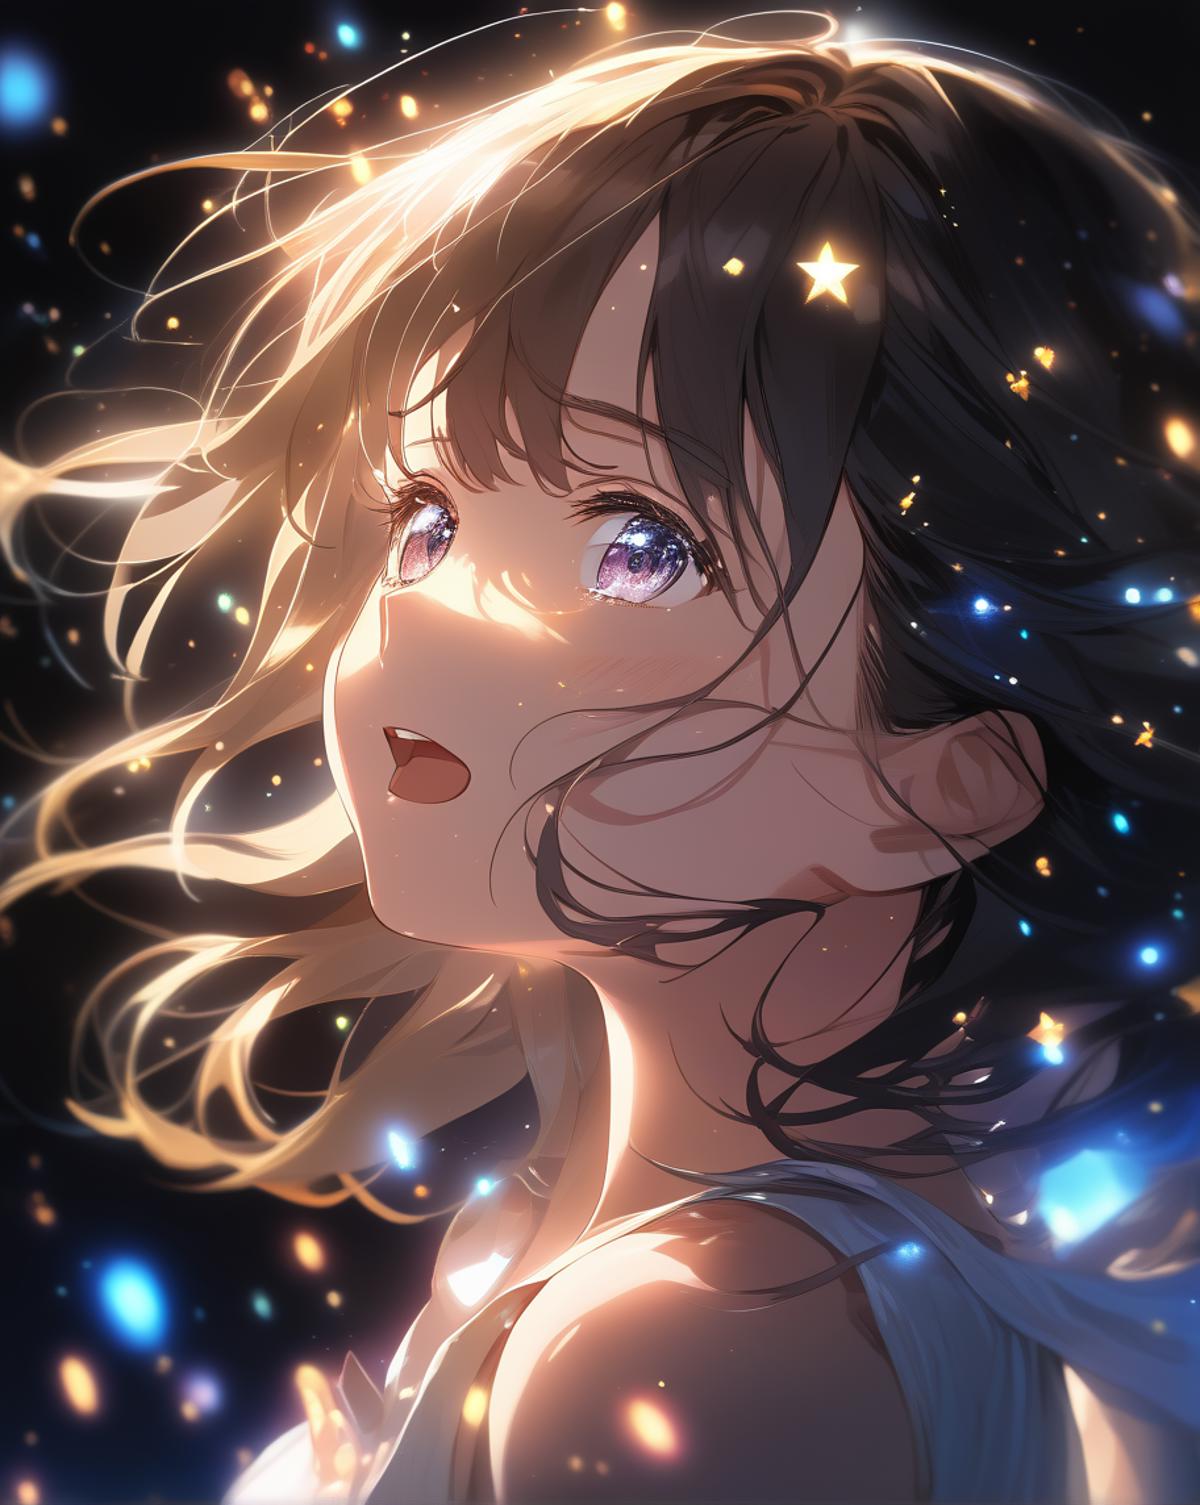 A young girl with long hair and purple eyes looking up at the stars.